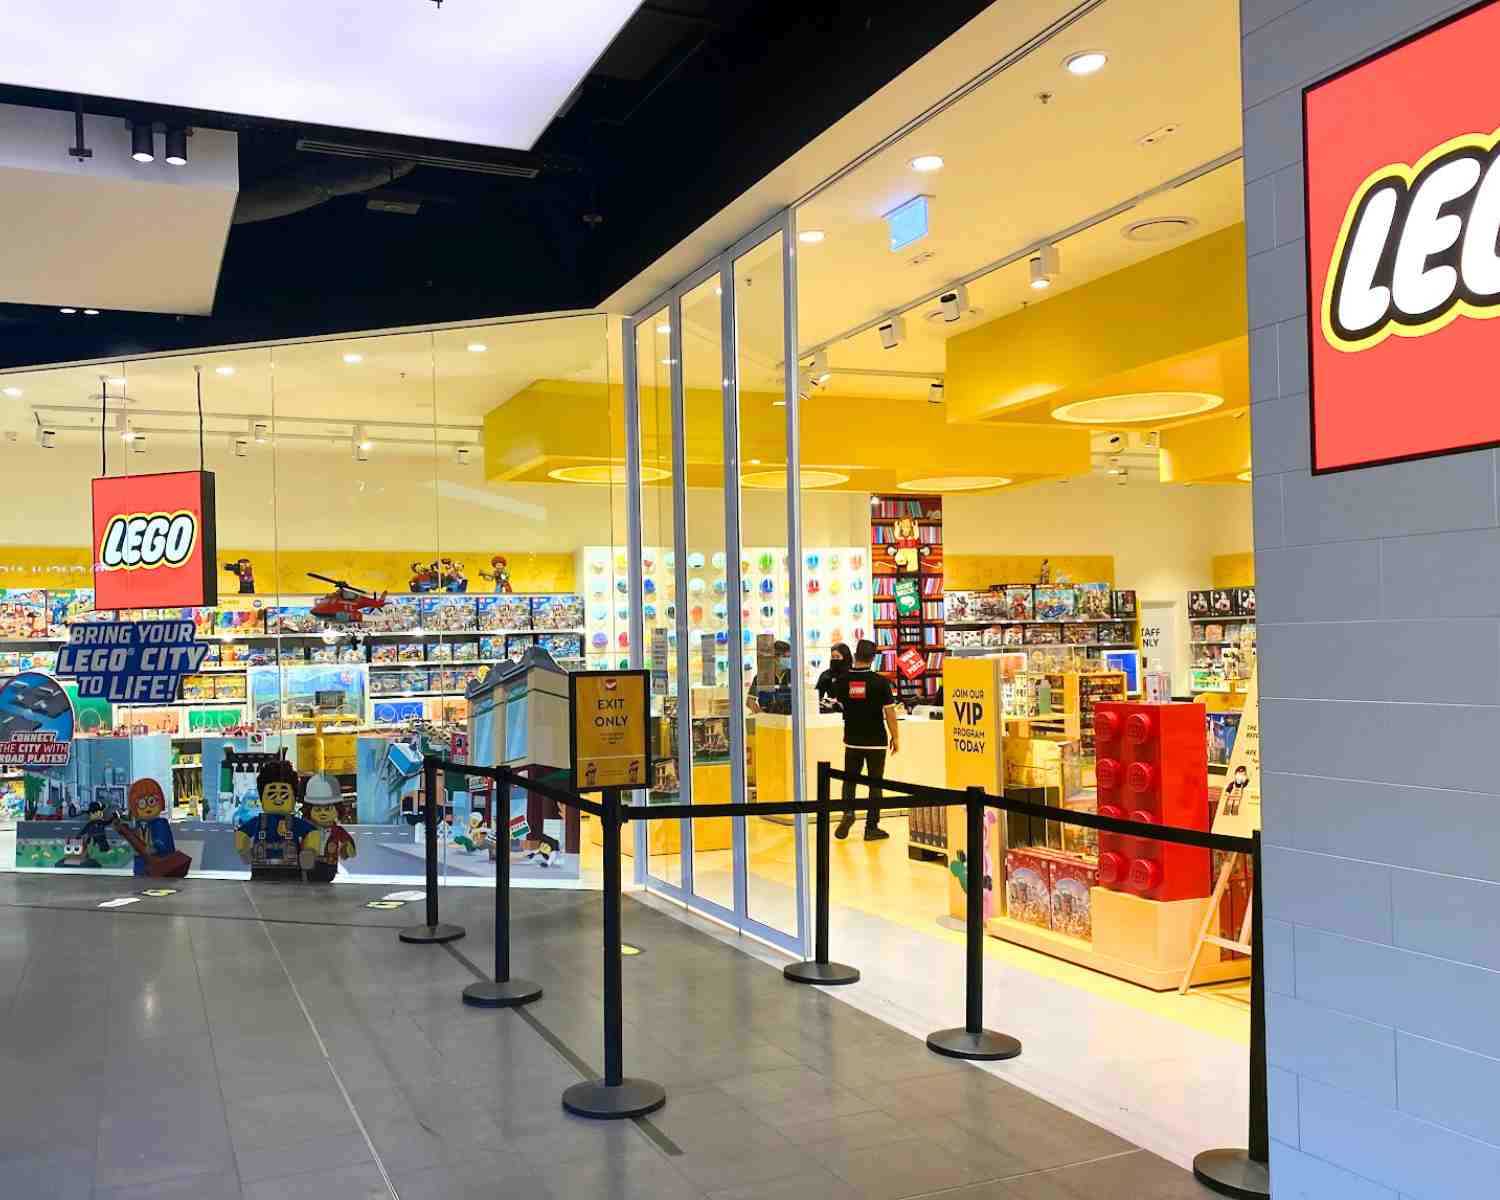 LEGO stores in Sydney are popping up everywhere. Broadway